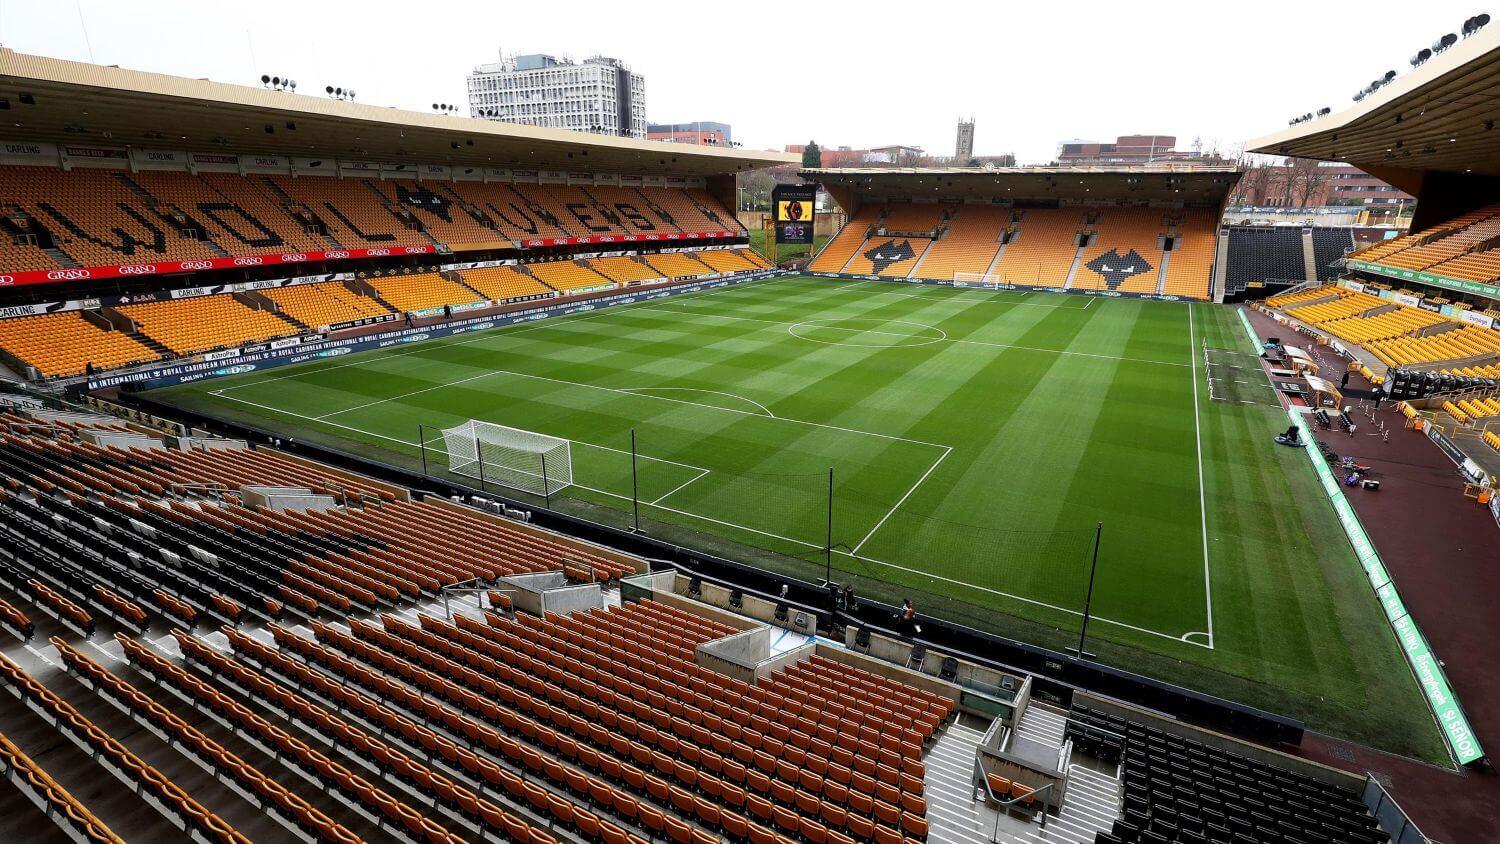 15 Captivating Facts About Molineux Stadium - Facts.net